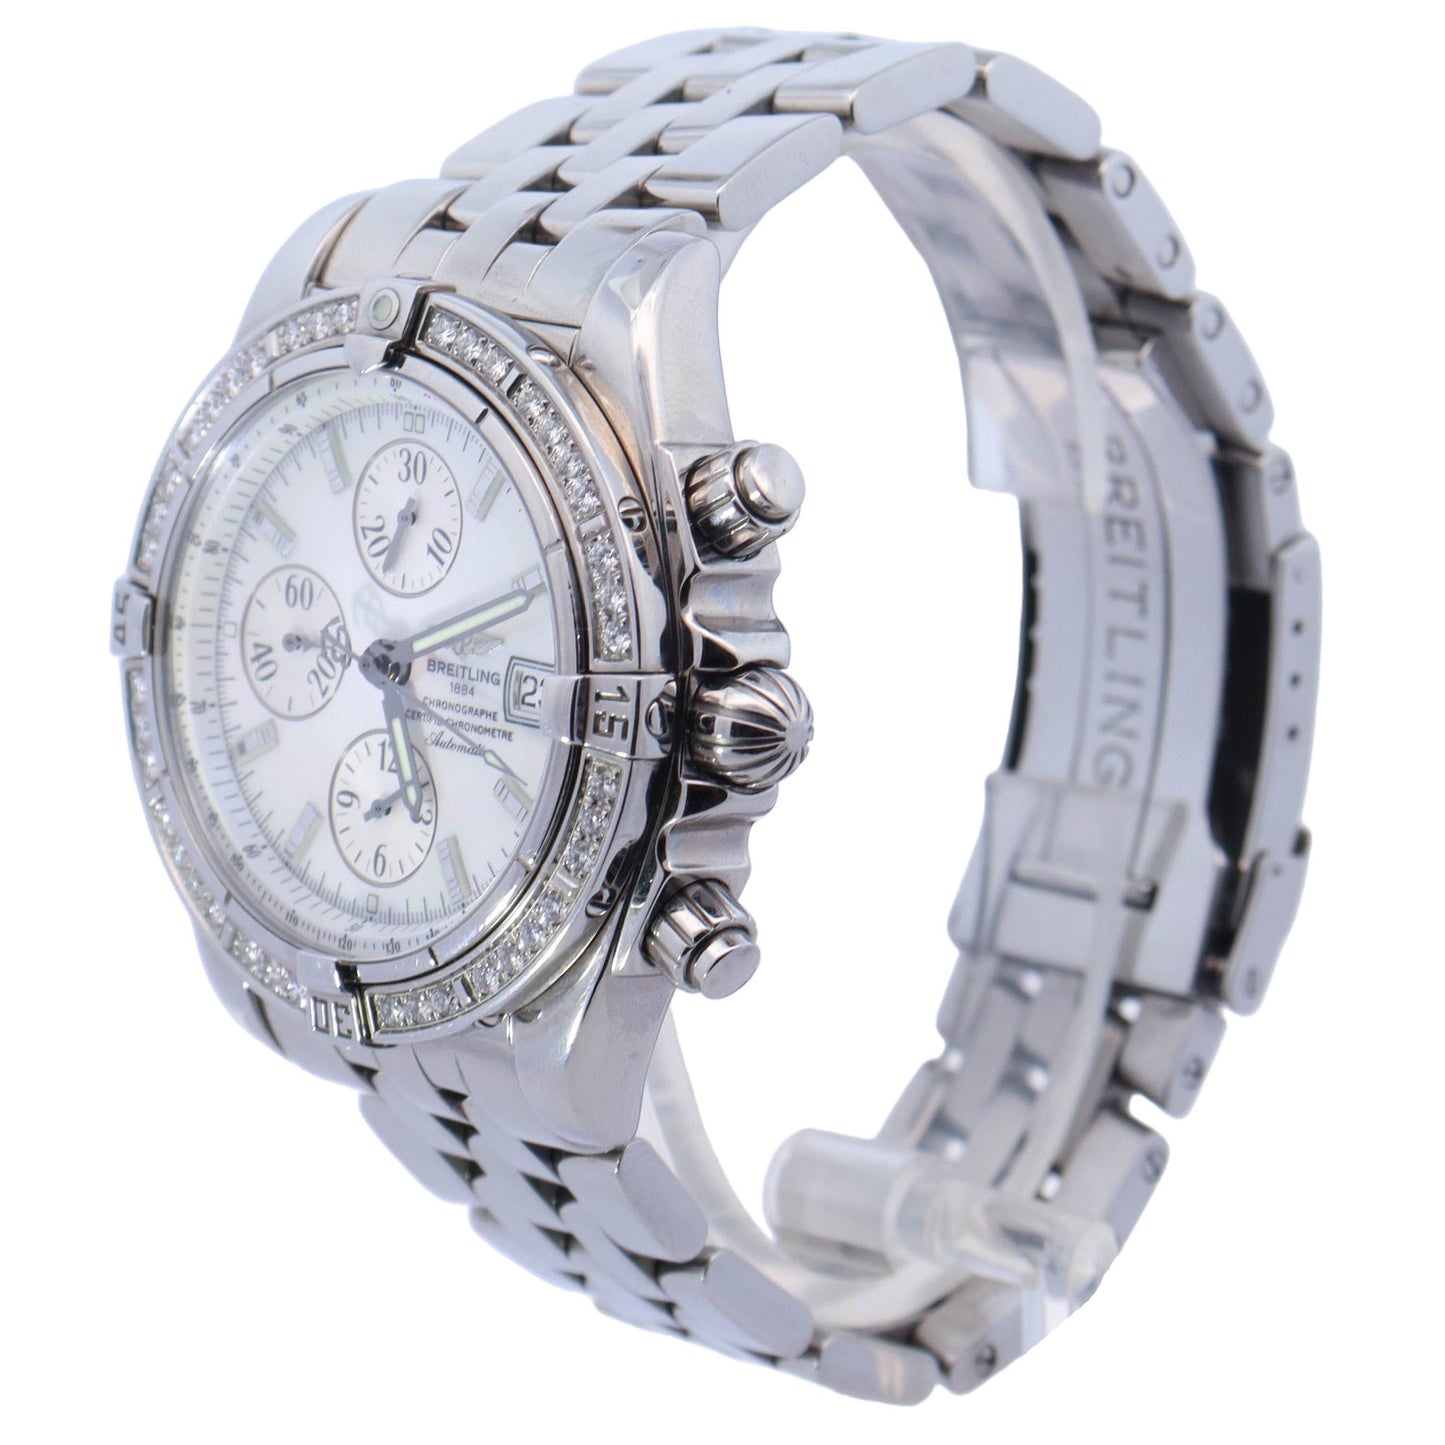 Breitling Chronomat Stainless Steel 44mm White MOP Stick Dial Watch Reference# A13356